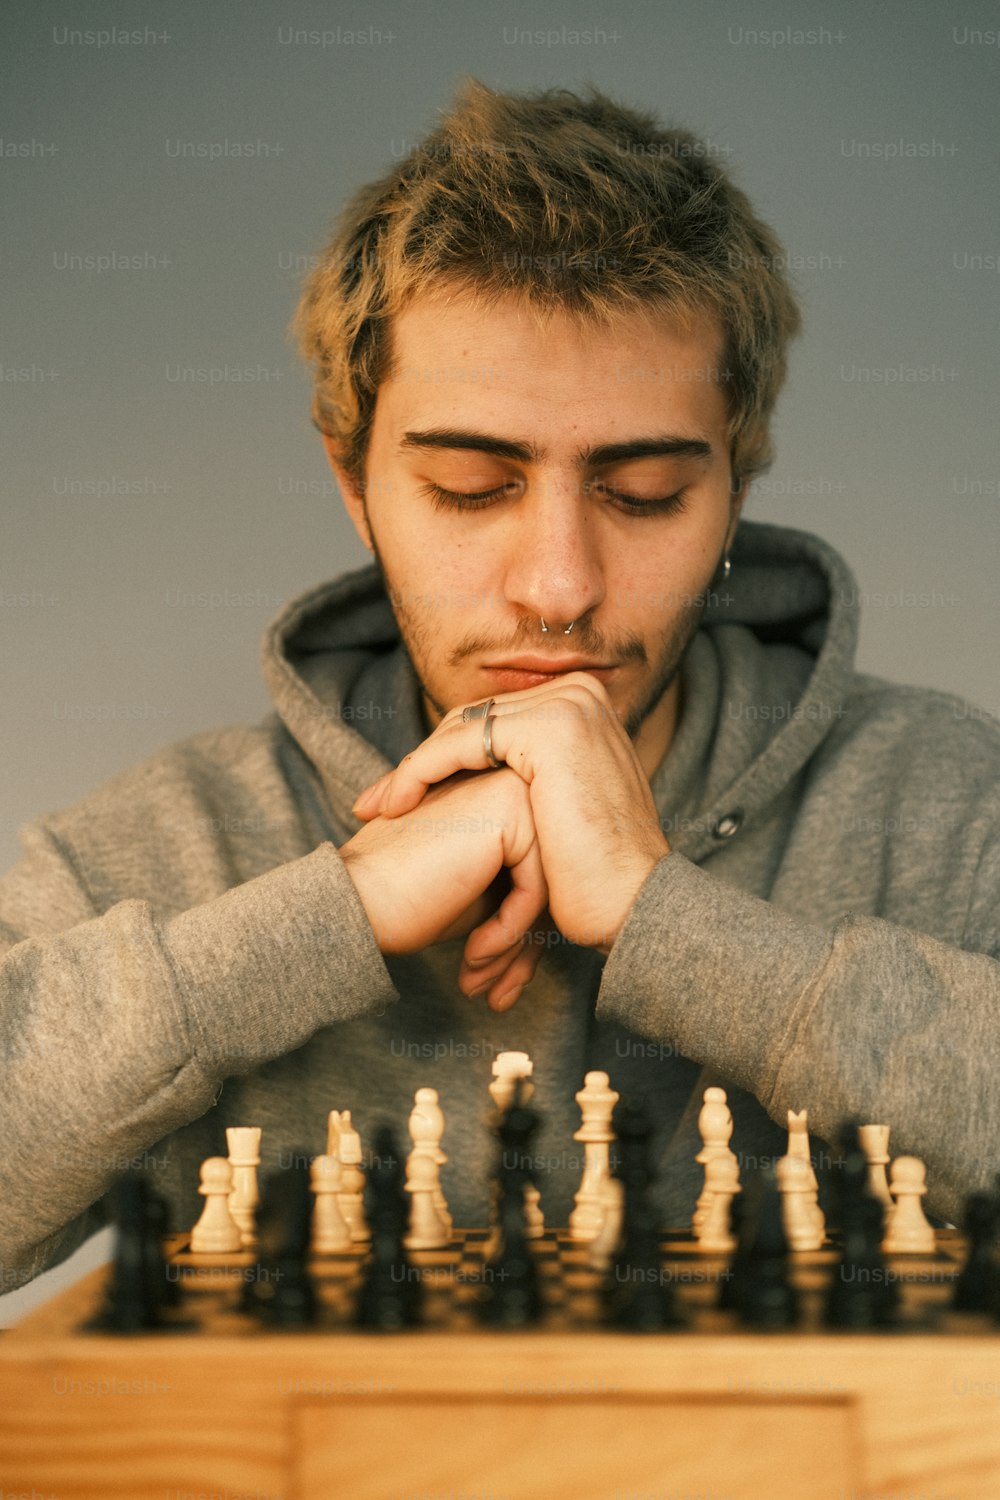 Hand Man Taking Chess Image & Photo (Free Trial)